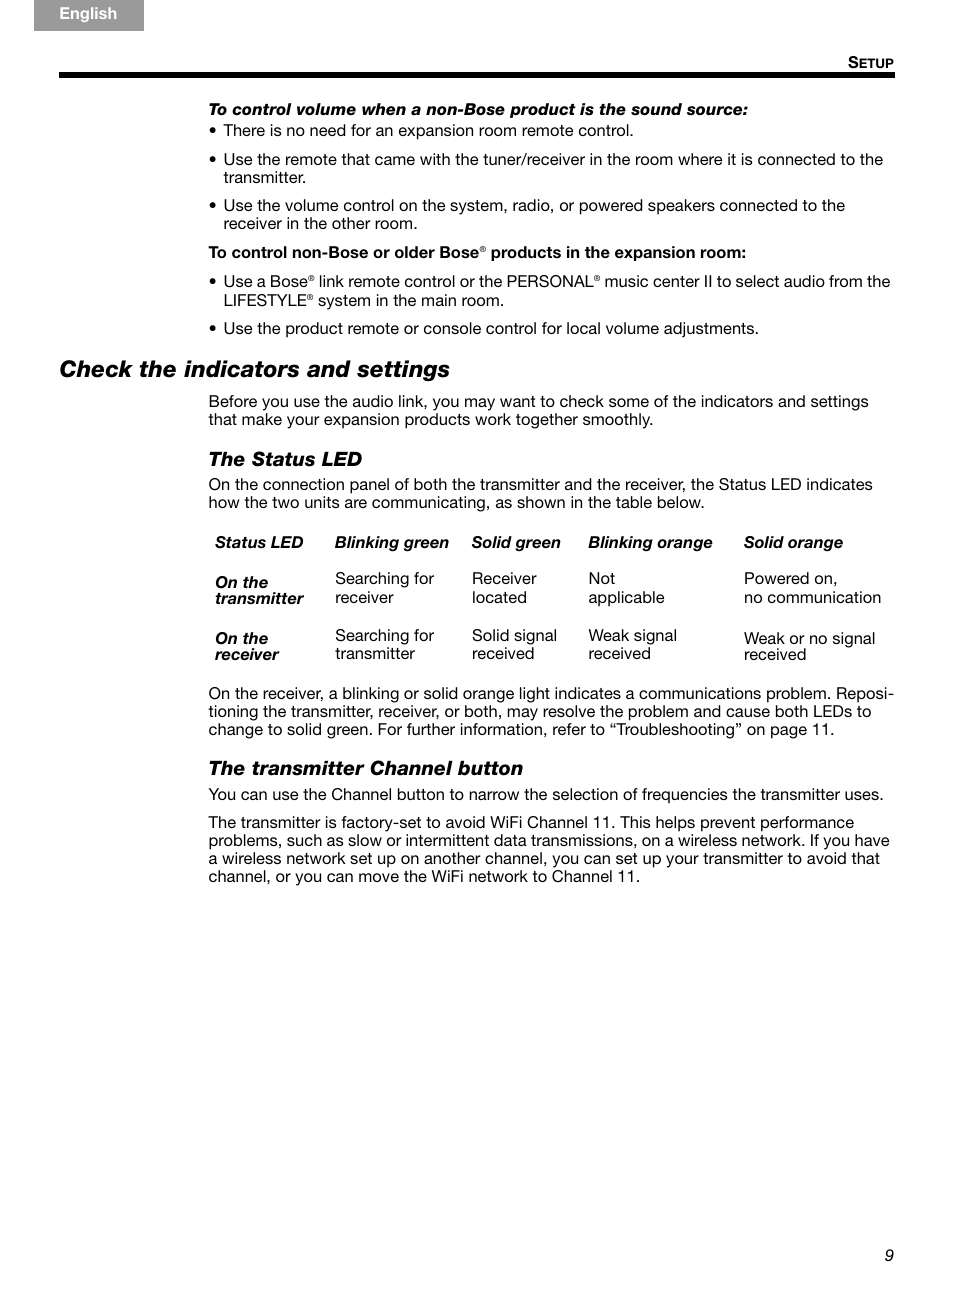 Check the indicators and settings | Bose Homewide Wireless Audio Link Link  AL8 User Manual | Page 9 / 14